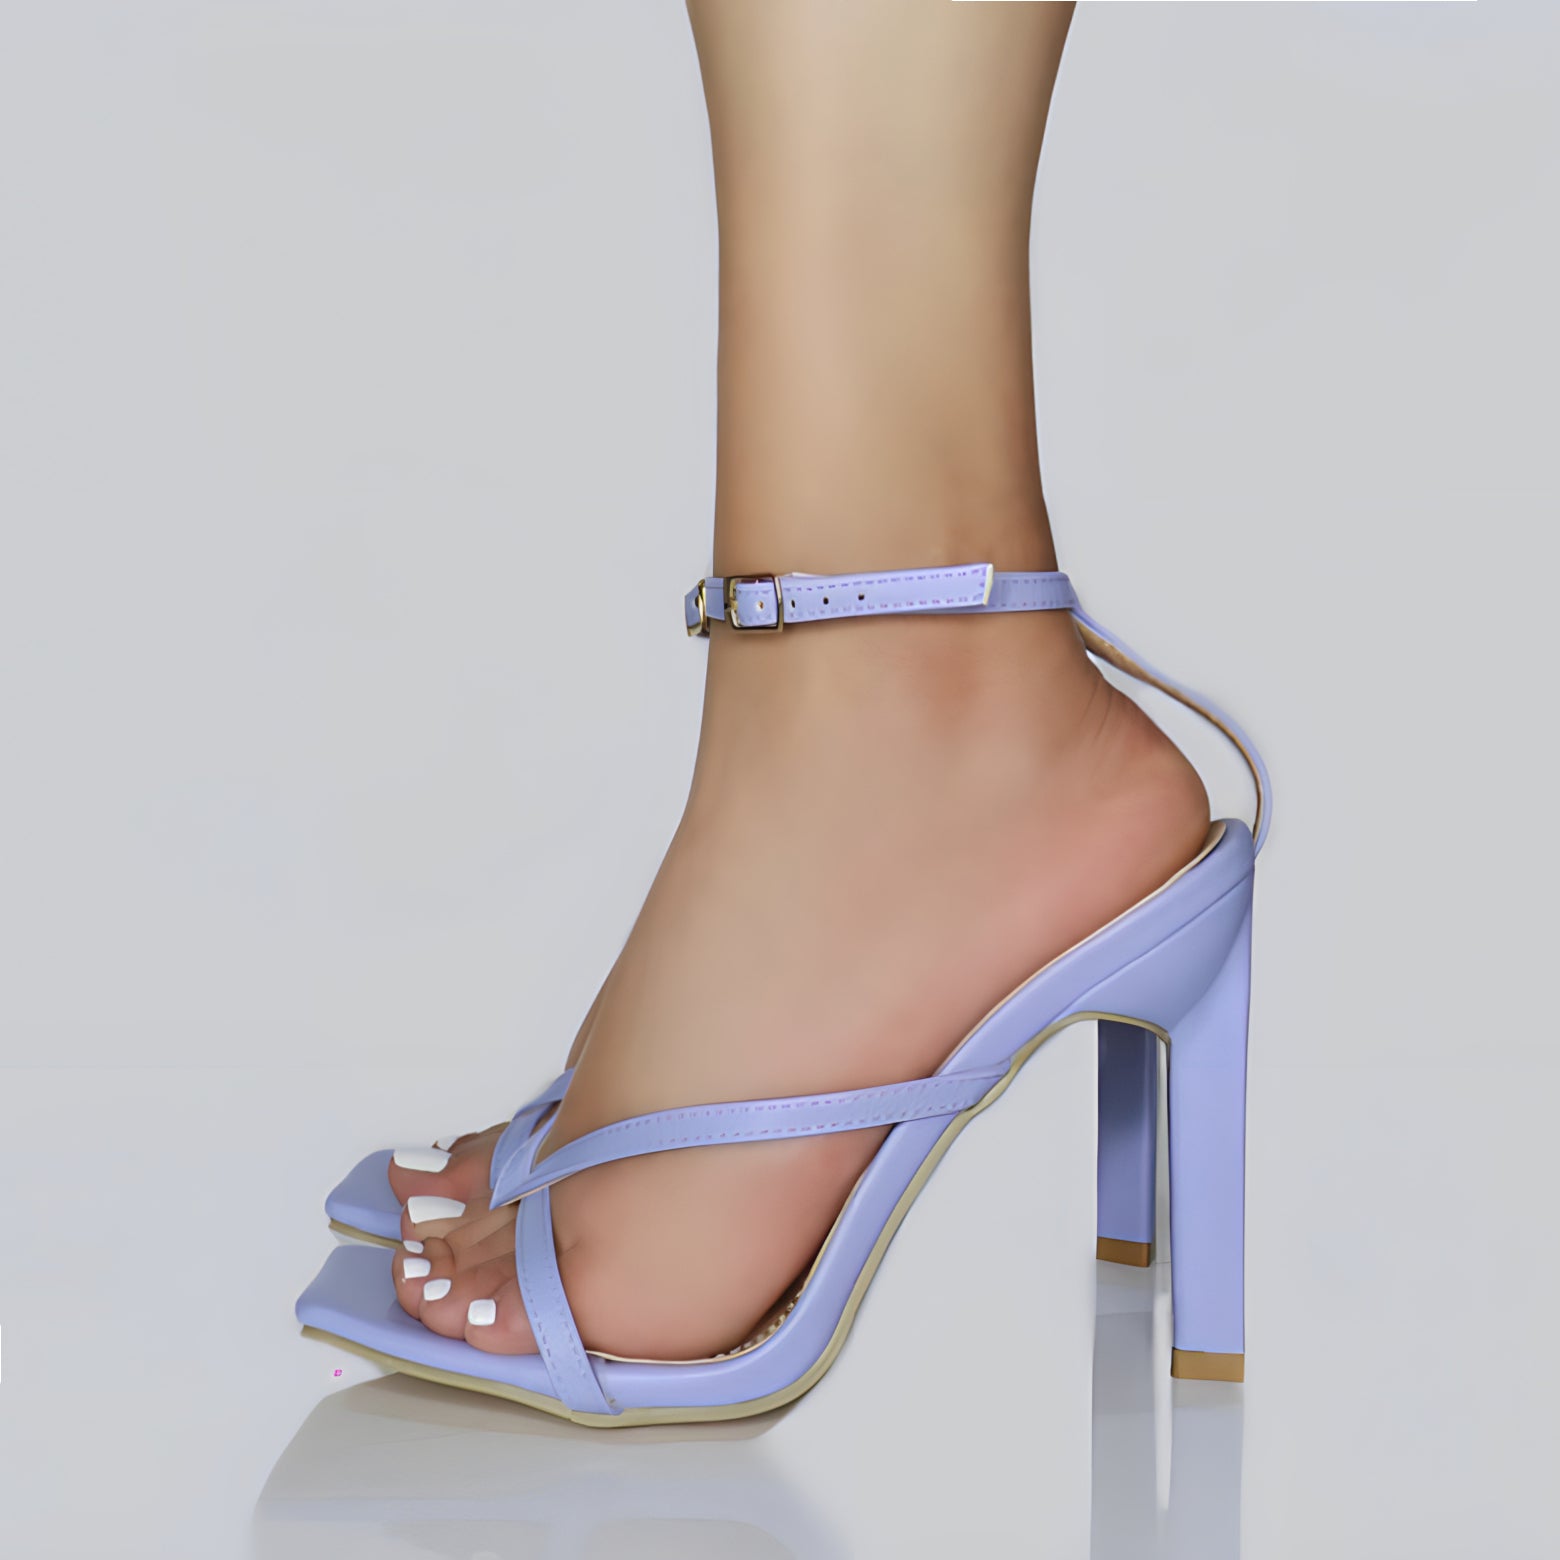 River Island diamante detail heeled sandal with bow in lilac | ASOS